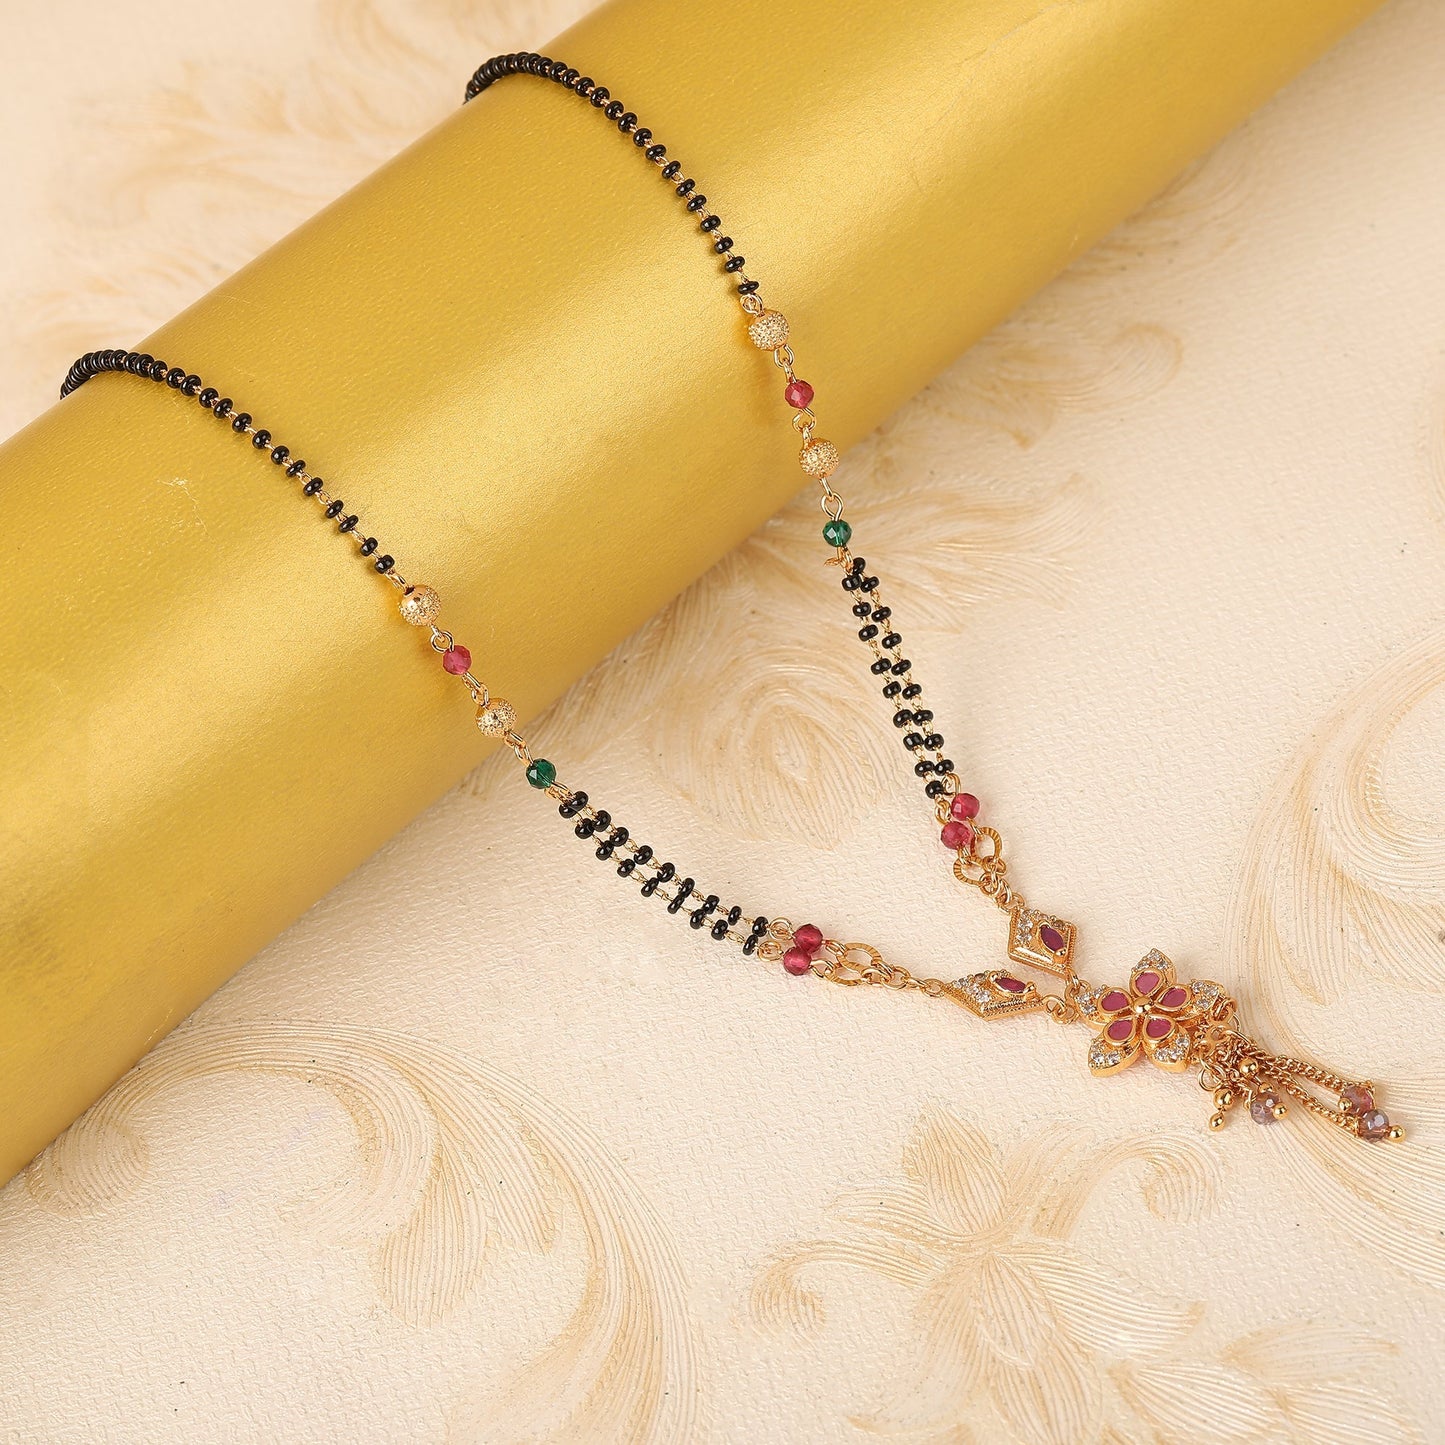 Bhagya Lakshmi Gold Plated Mangalsutra Collection - Shop Now!